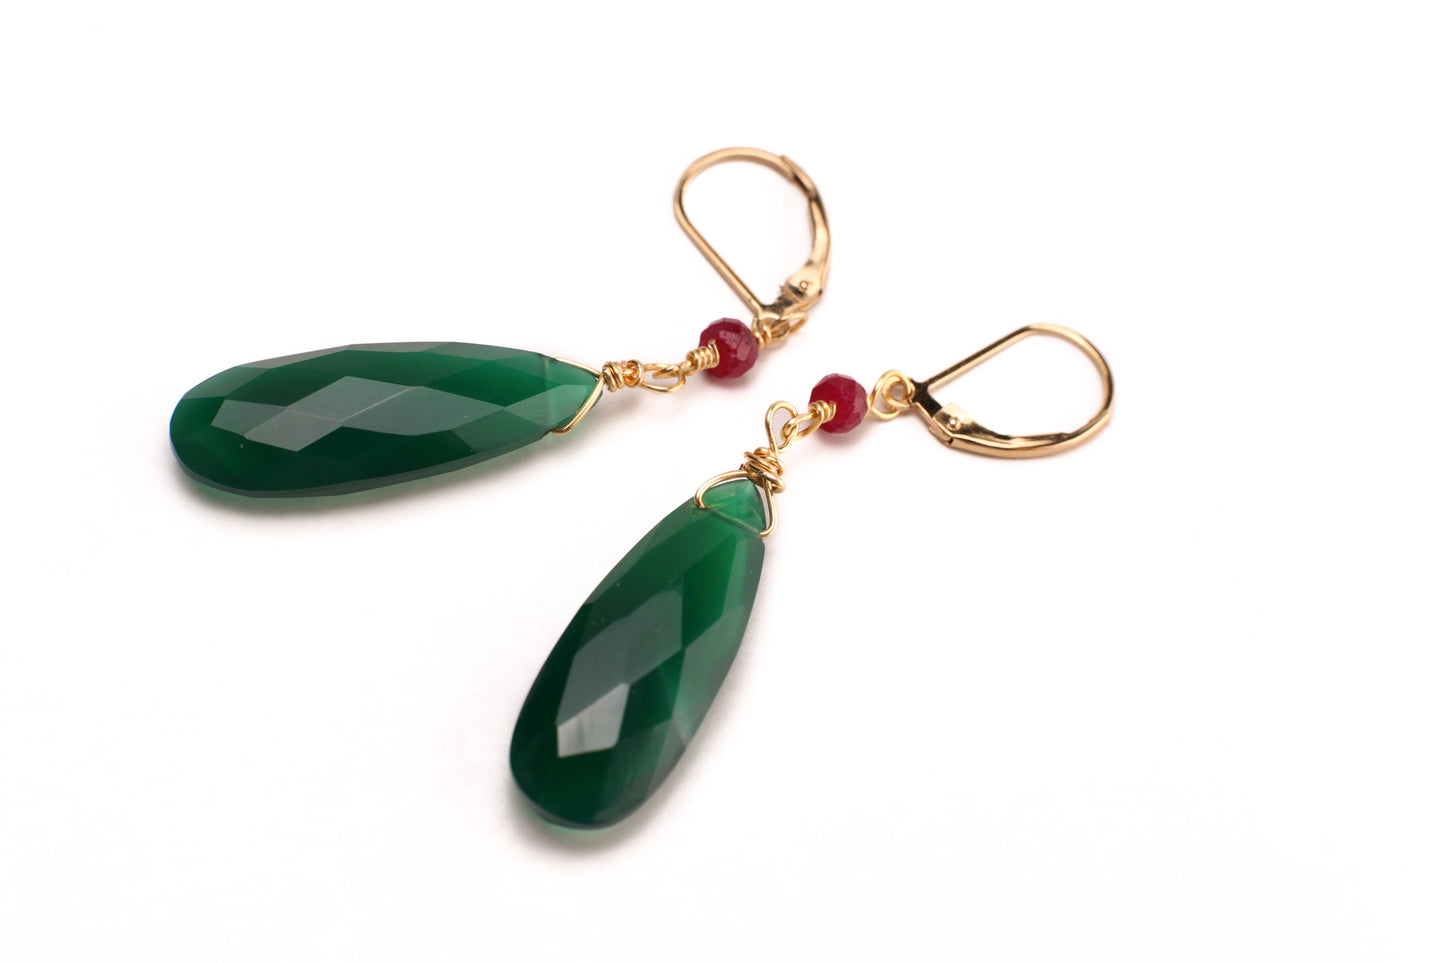 Genuine Green Onyx 10x30mm Wire Wrapped Briolette Teardrop with Ruby in 14K Gold Filled lever back Earring, Howl's Castle Earrings, Precious